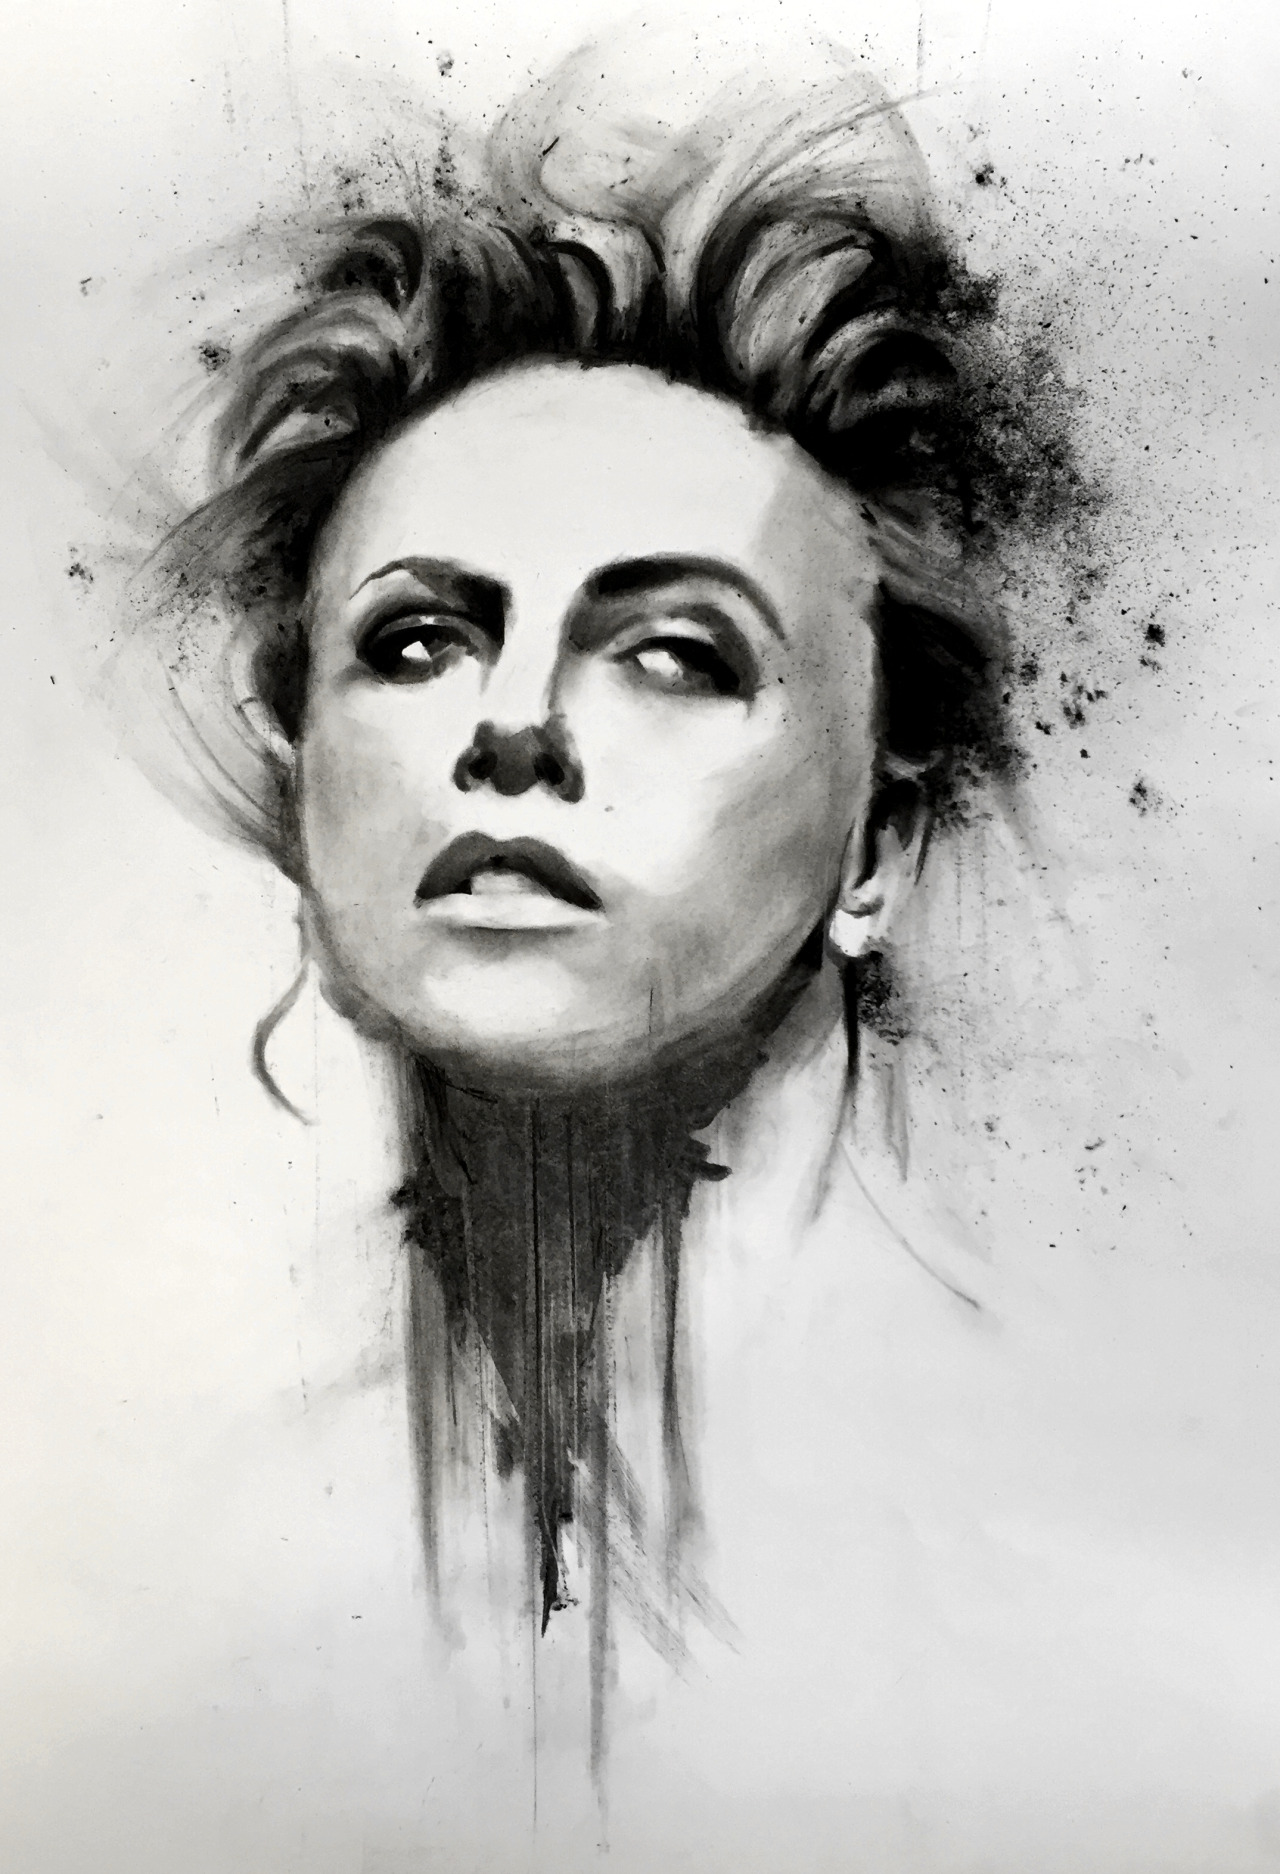 charcoal drawing made by Denny Stoekenbroek